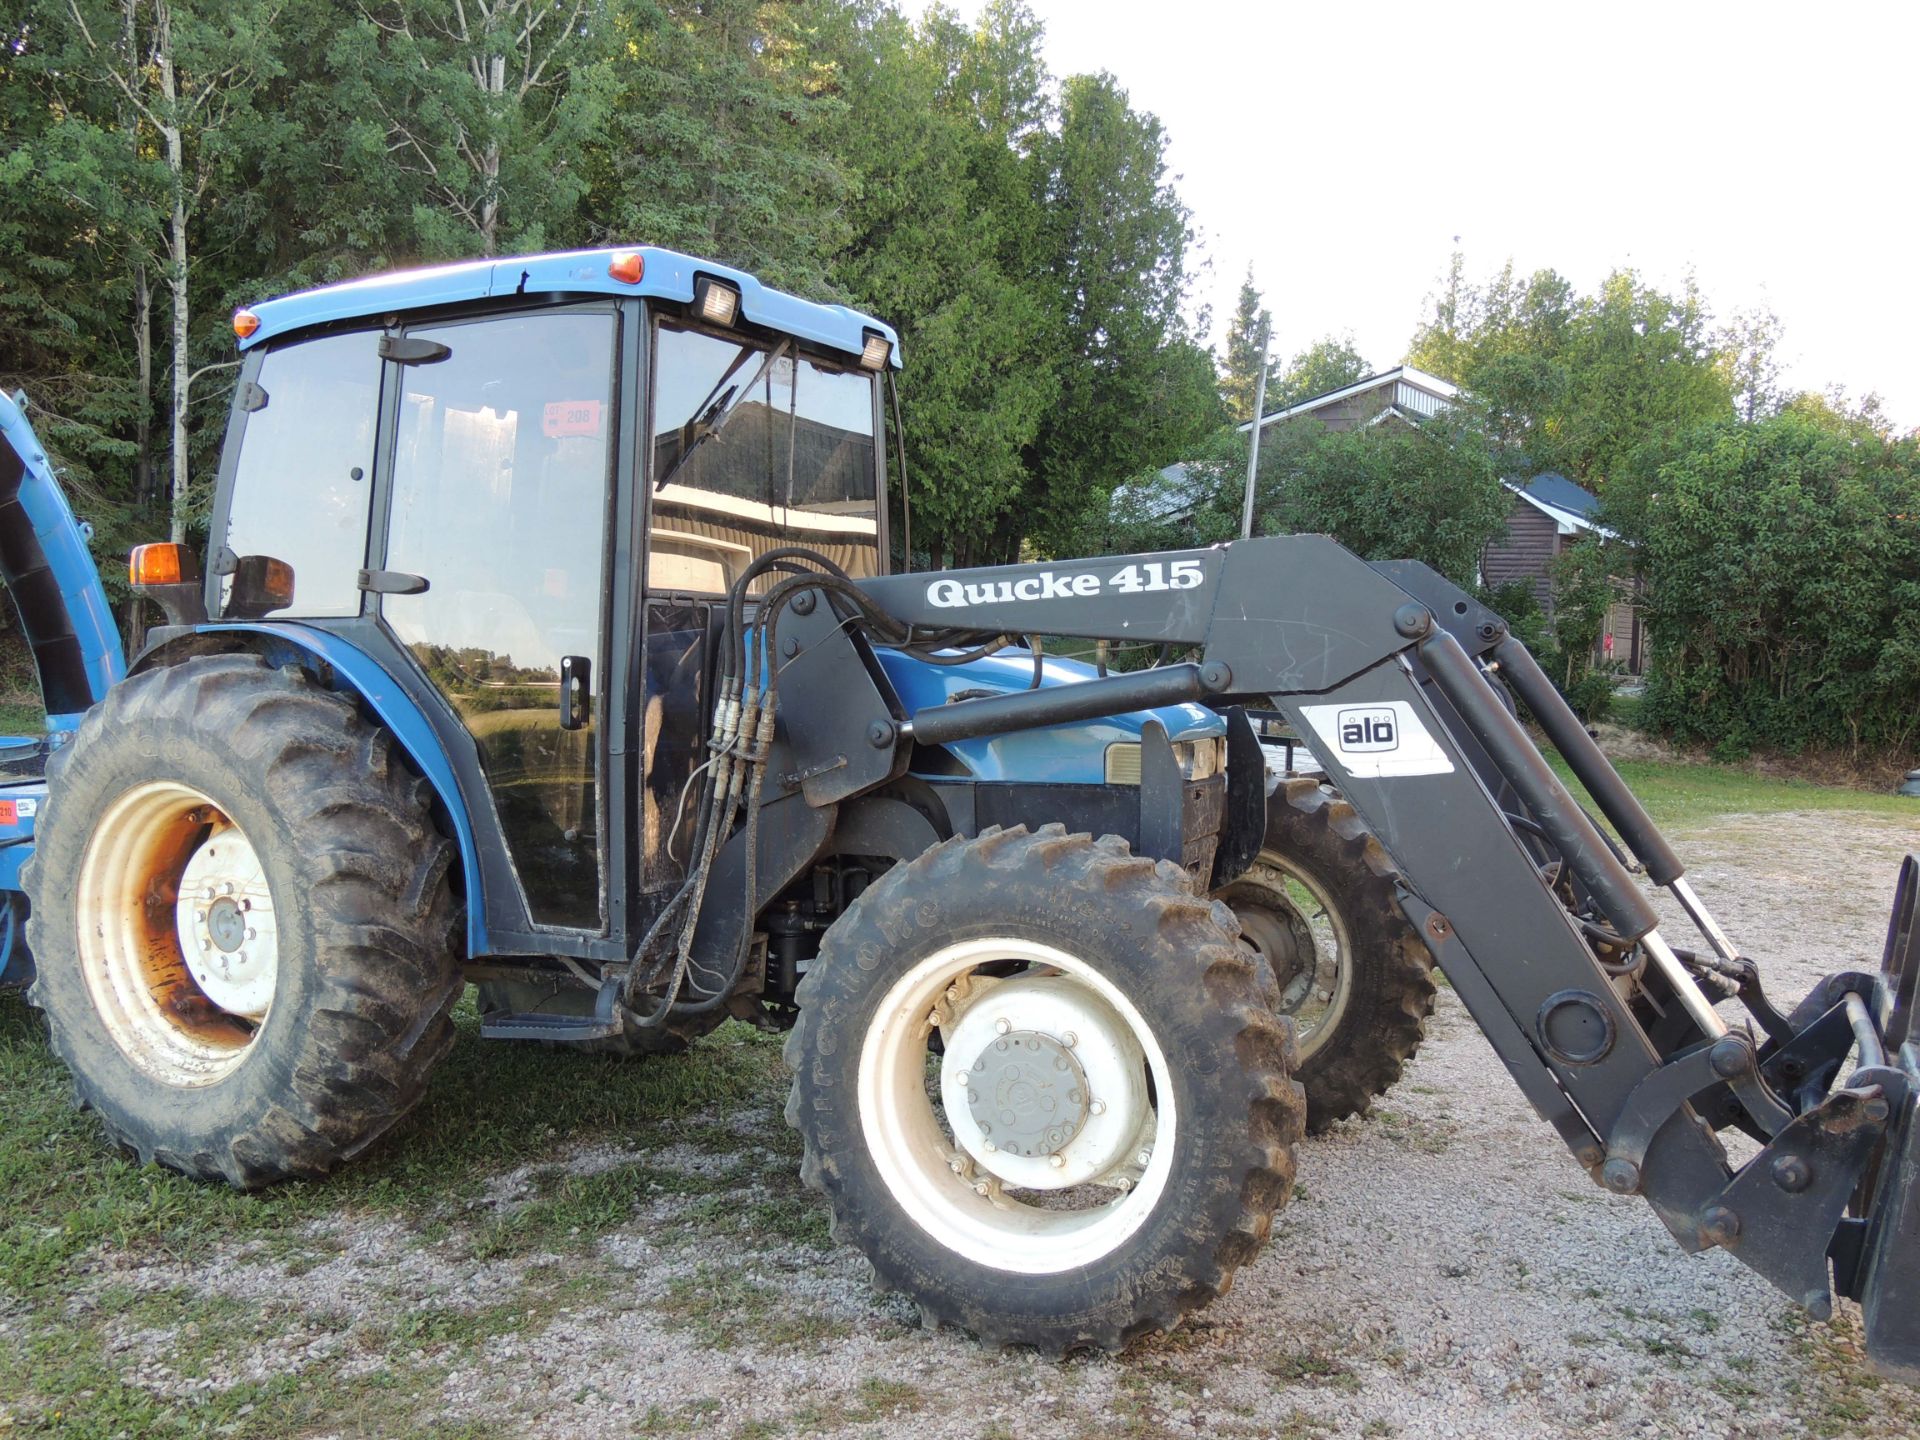 NEW HOLLAND TN75S DIESEL TRACTOR WITH IVECO 2.9L 3 CYLINDER ENGINE, 16.9-30 REAR TIRES, ENCLOSED